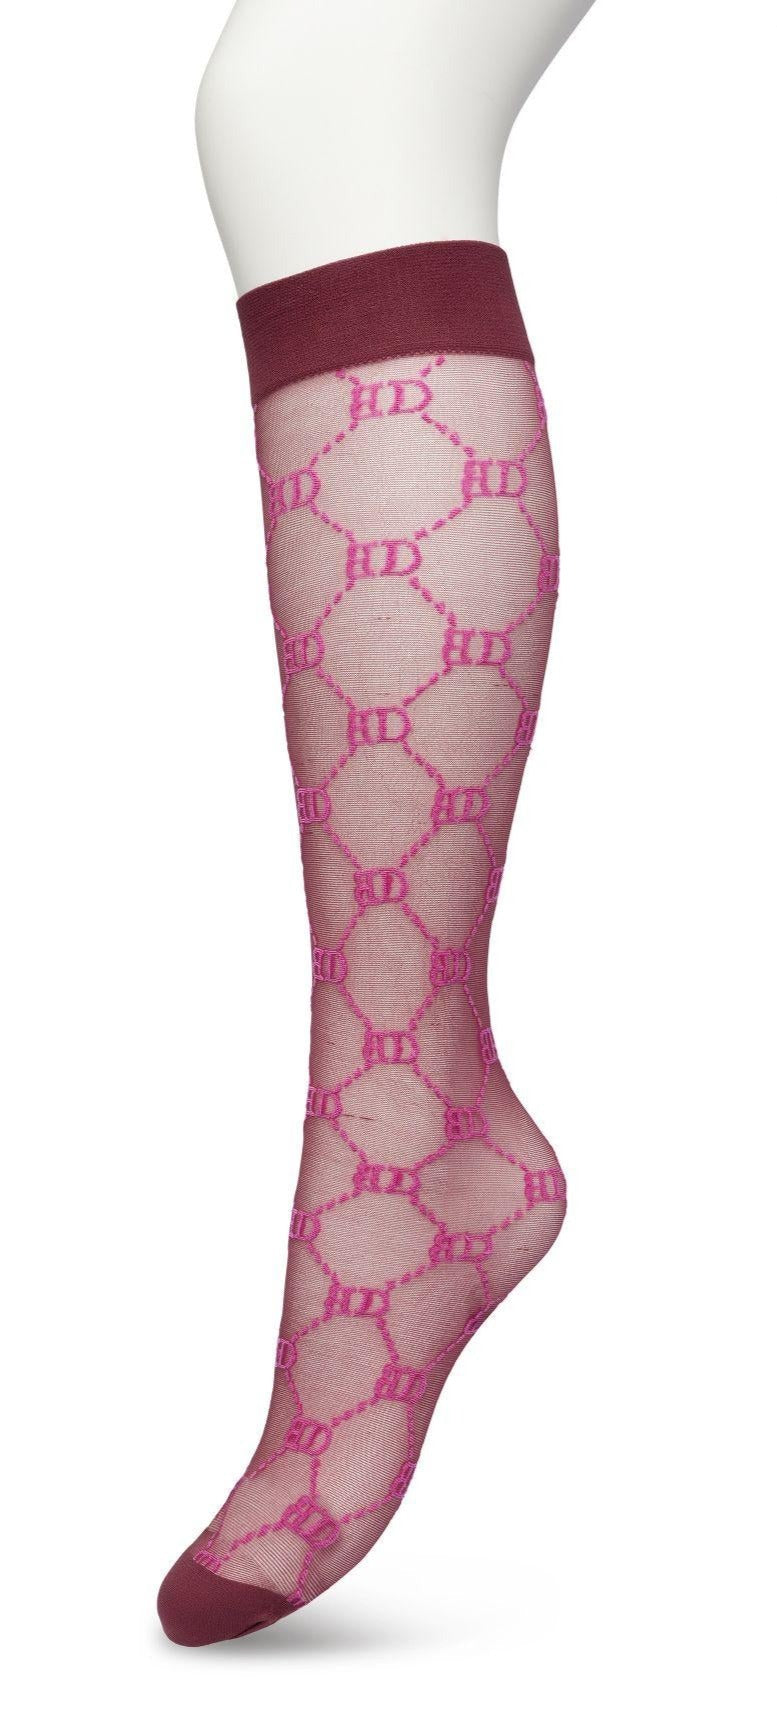 Bonnie Doon BP221801 Logo Knee-highs - Sheer wine and pink Gucci inspired fashion knee high socks with a woven dotted diamond style pattern with BD for Bonnie Doon